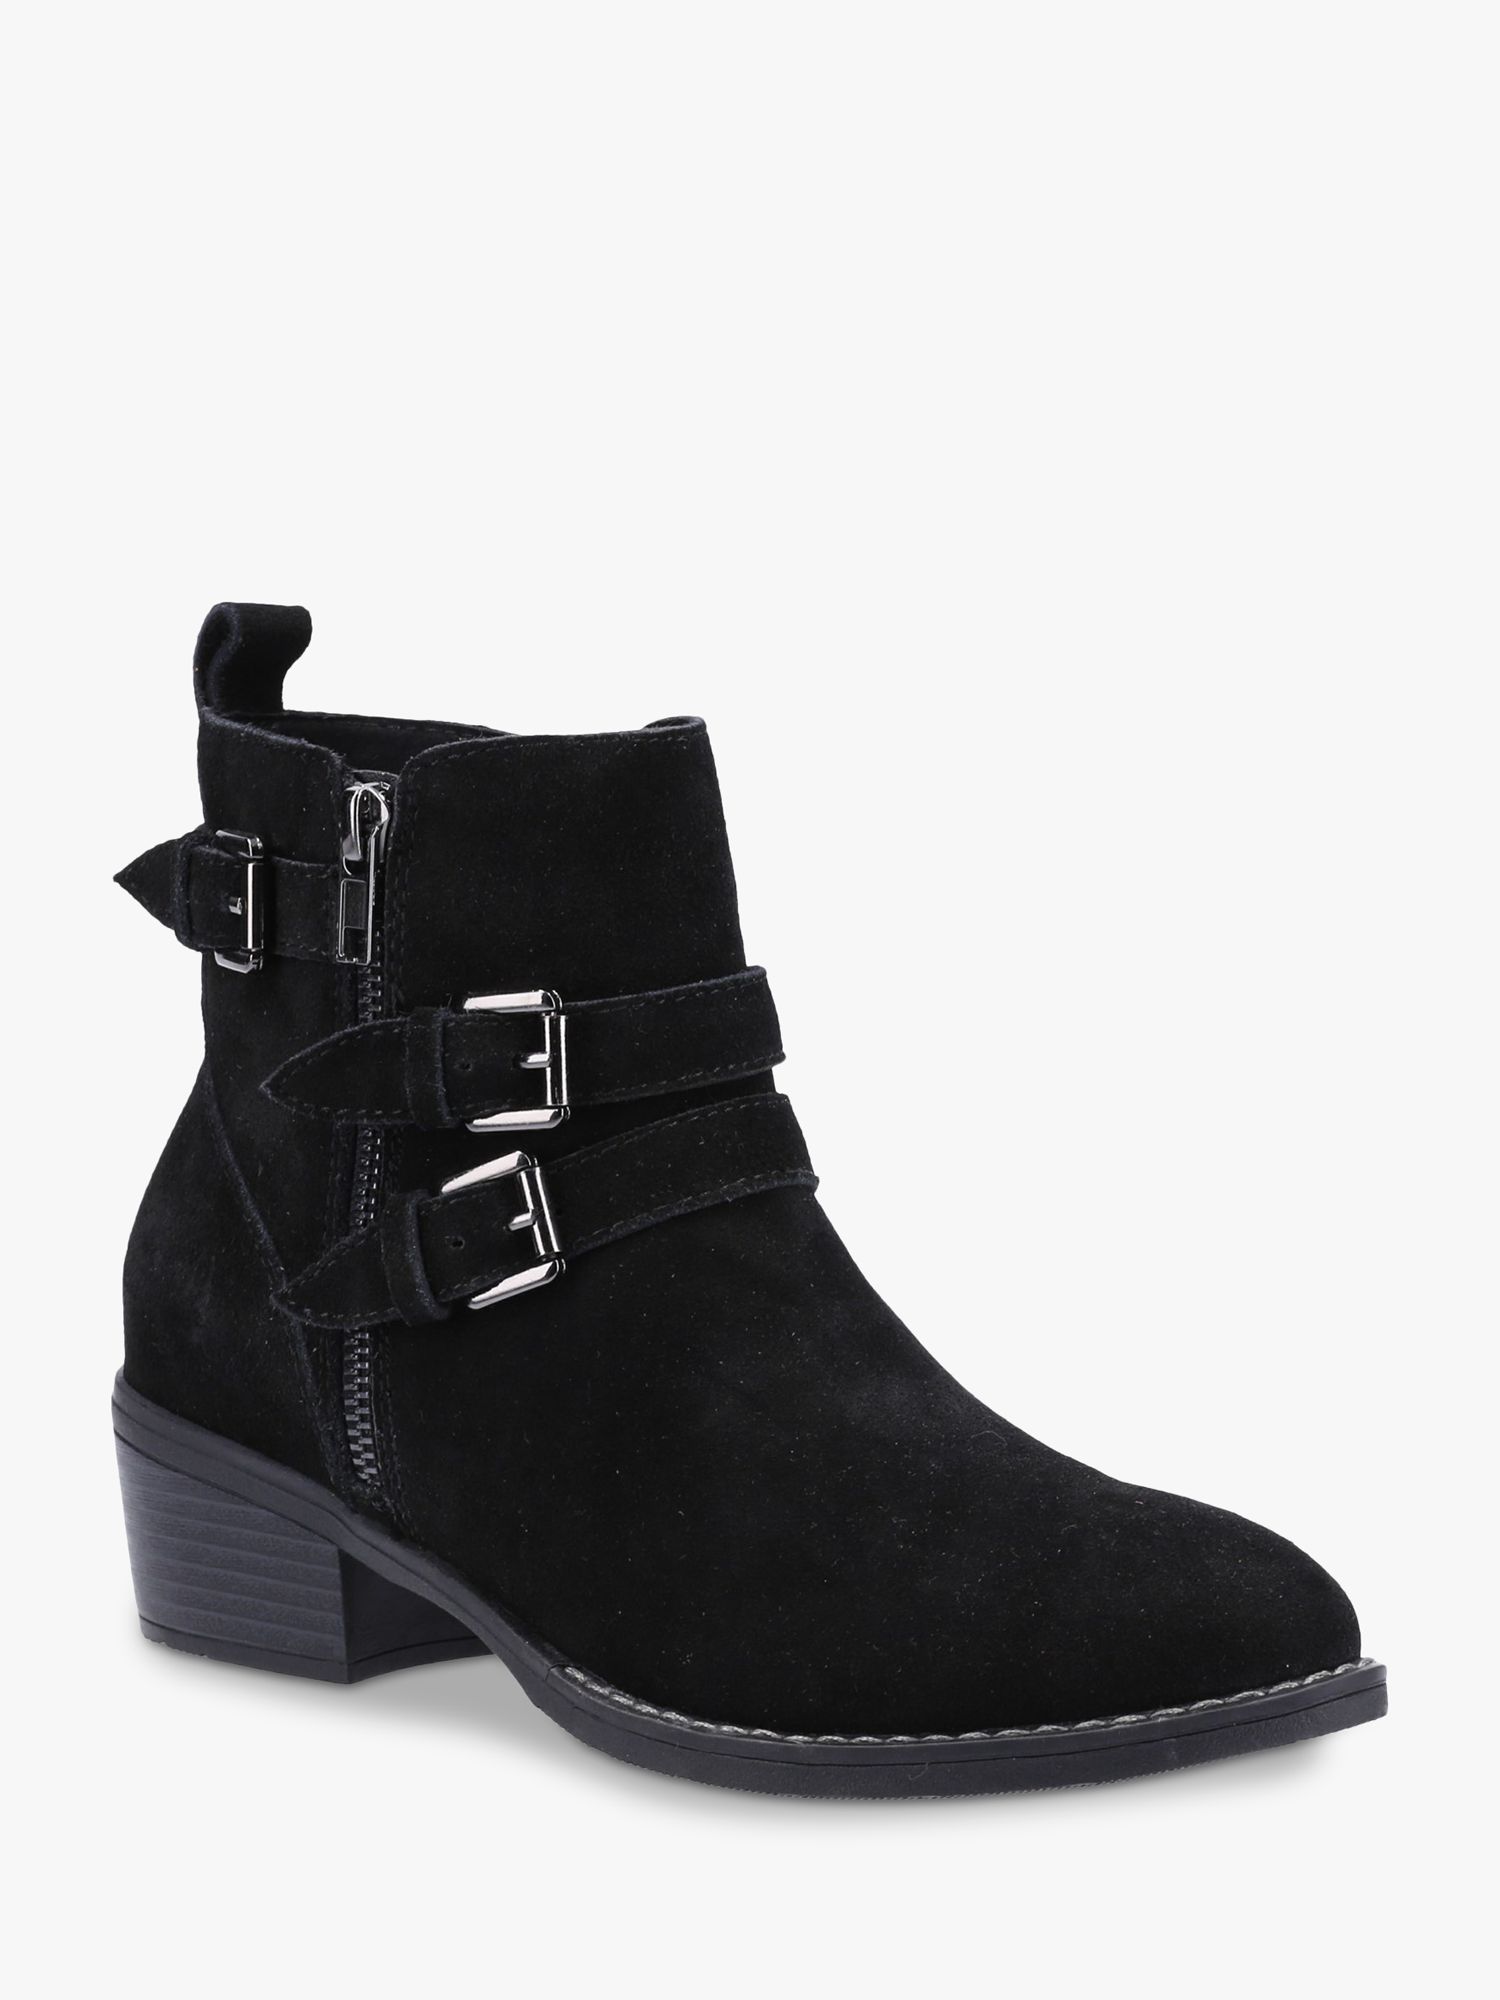 Hush Puppies Jenna Suede Ankle Boots, Black at John Lewis & Partners